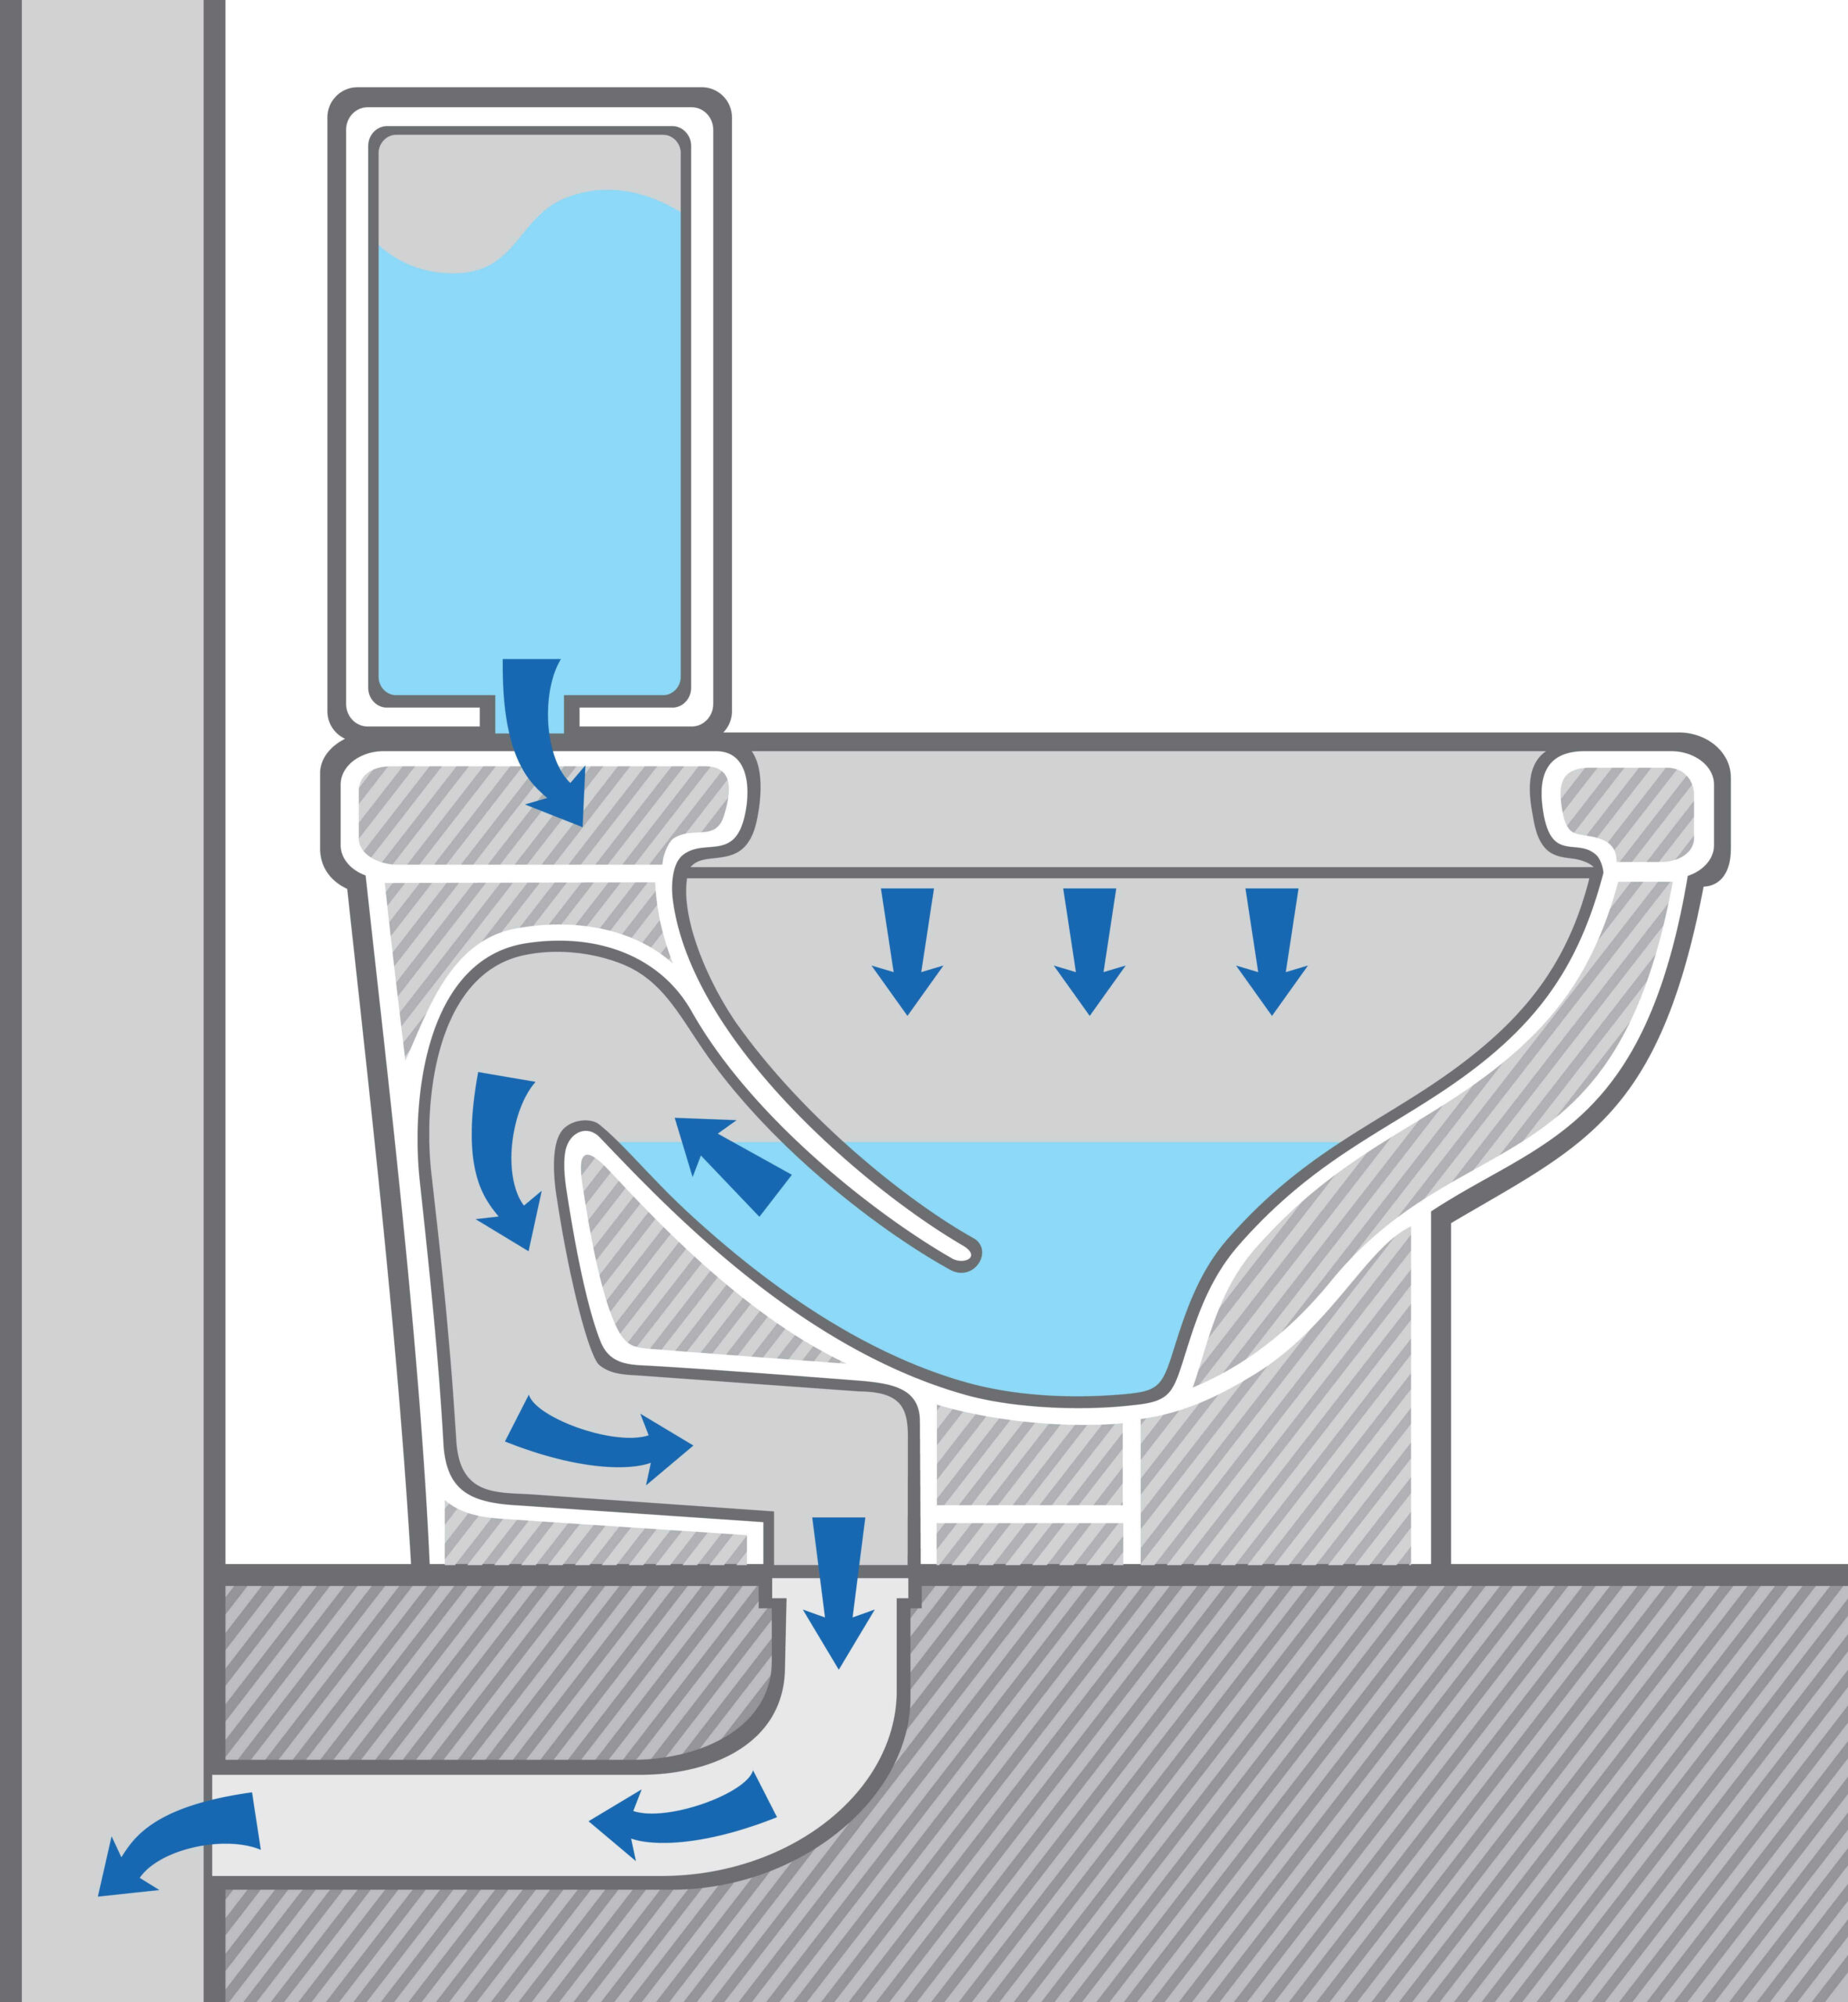 Cross section of the water flow of a toilet.